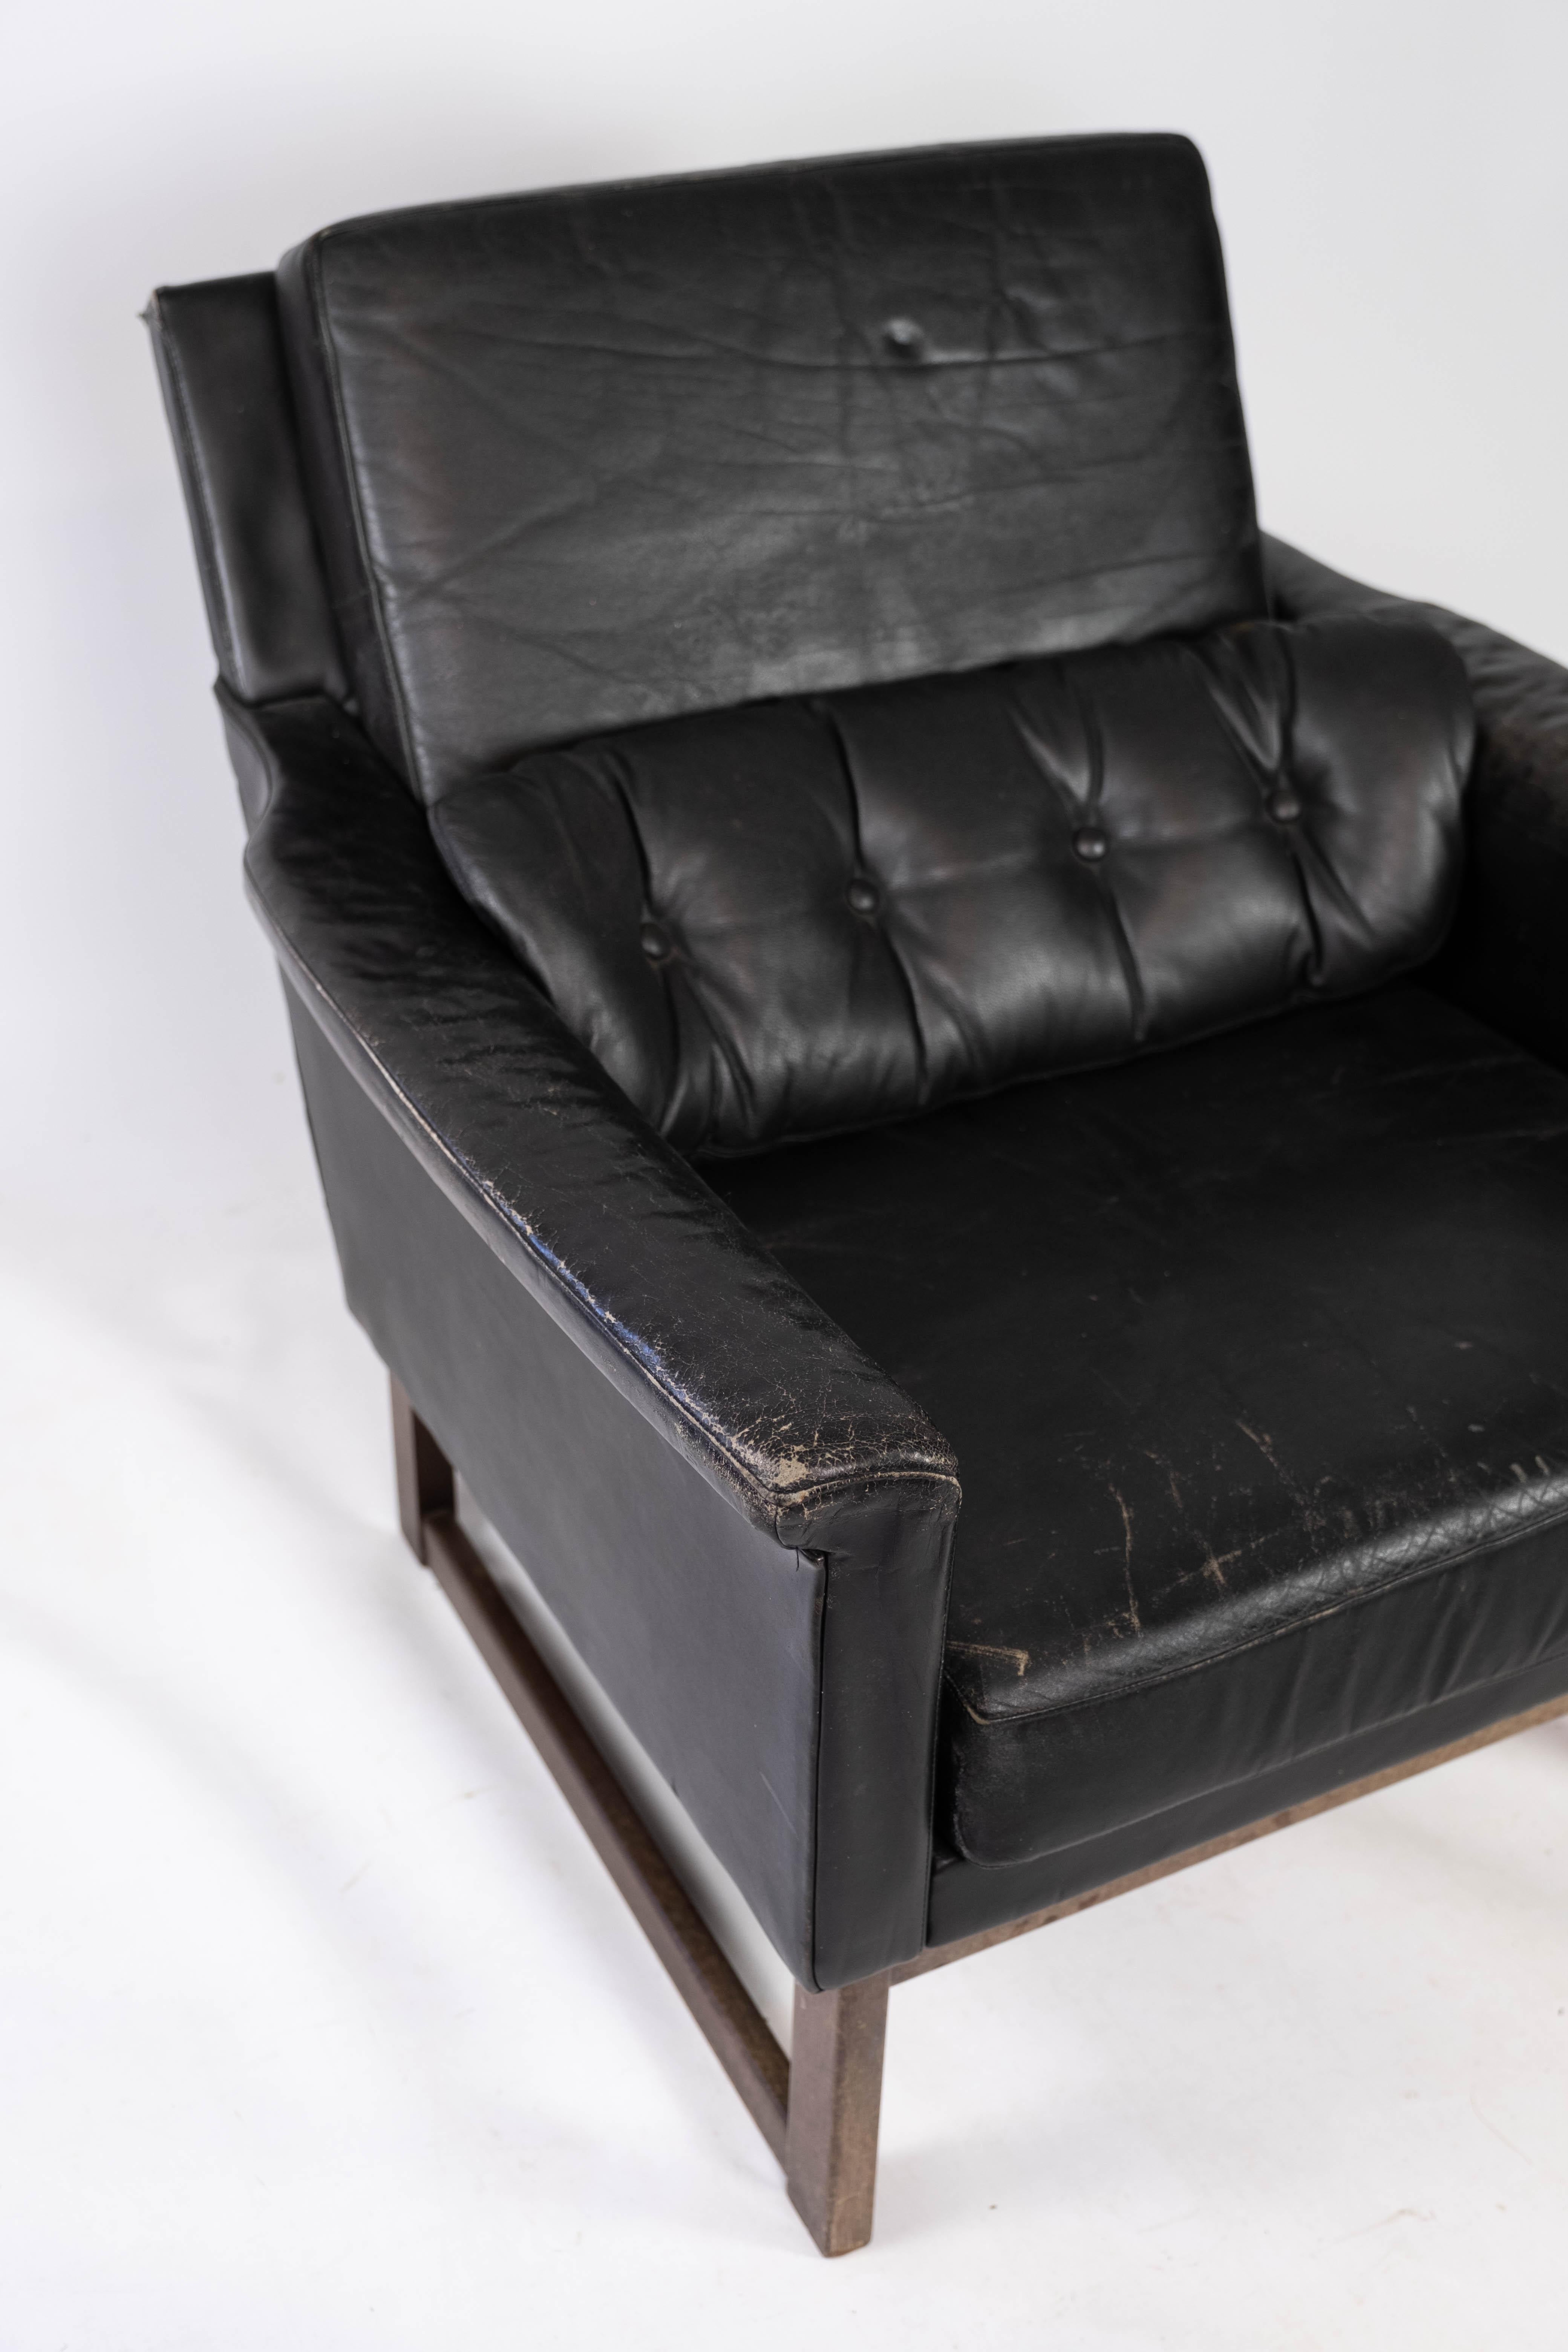 Scandinavian Modern Easy Chair Upholstered with Black Leather and Legs in Wood, by Illum Wikkelsø